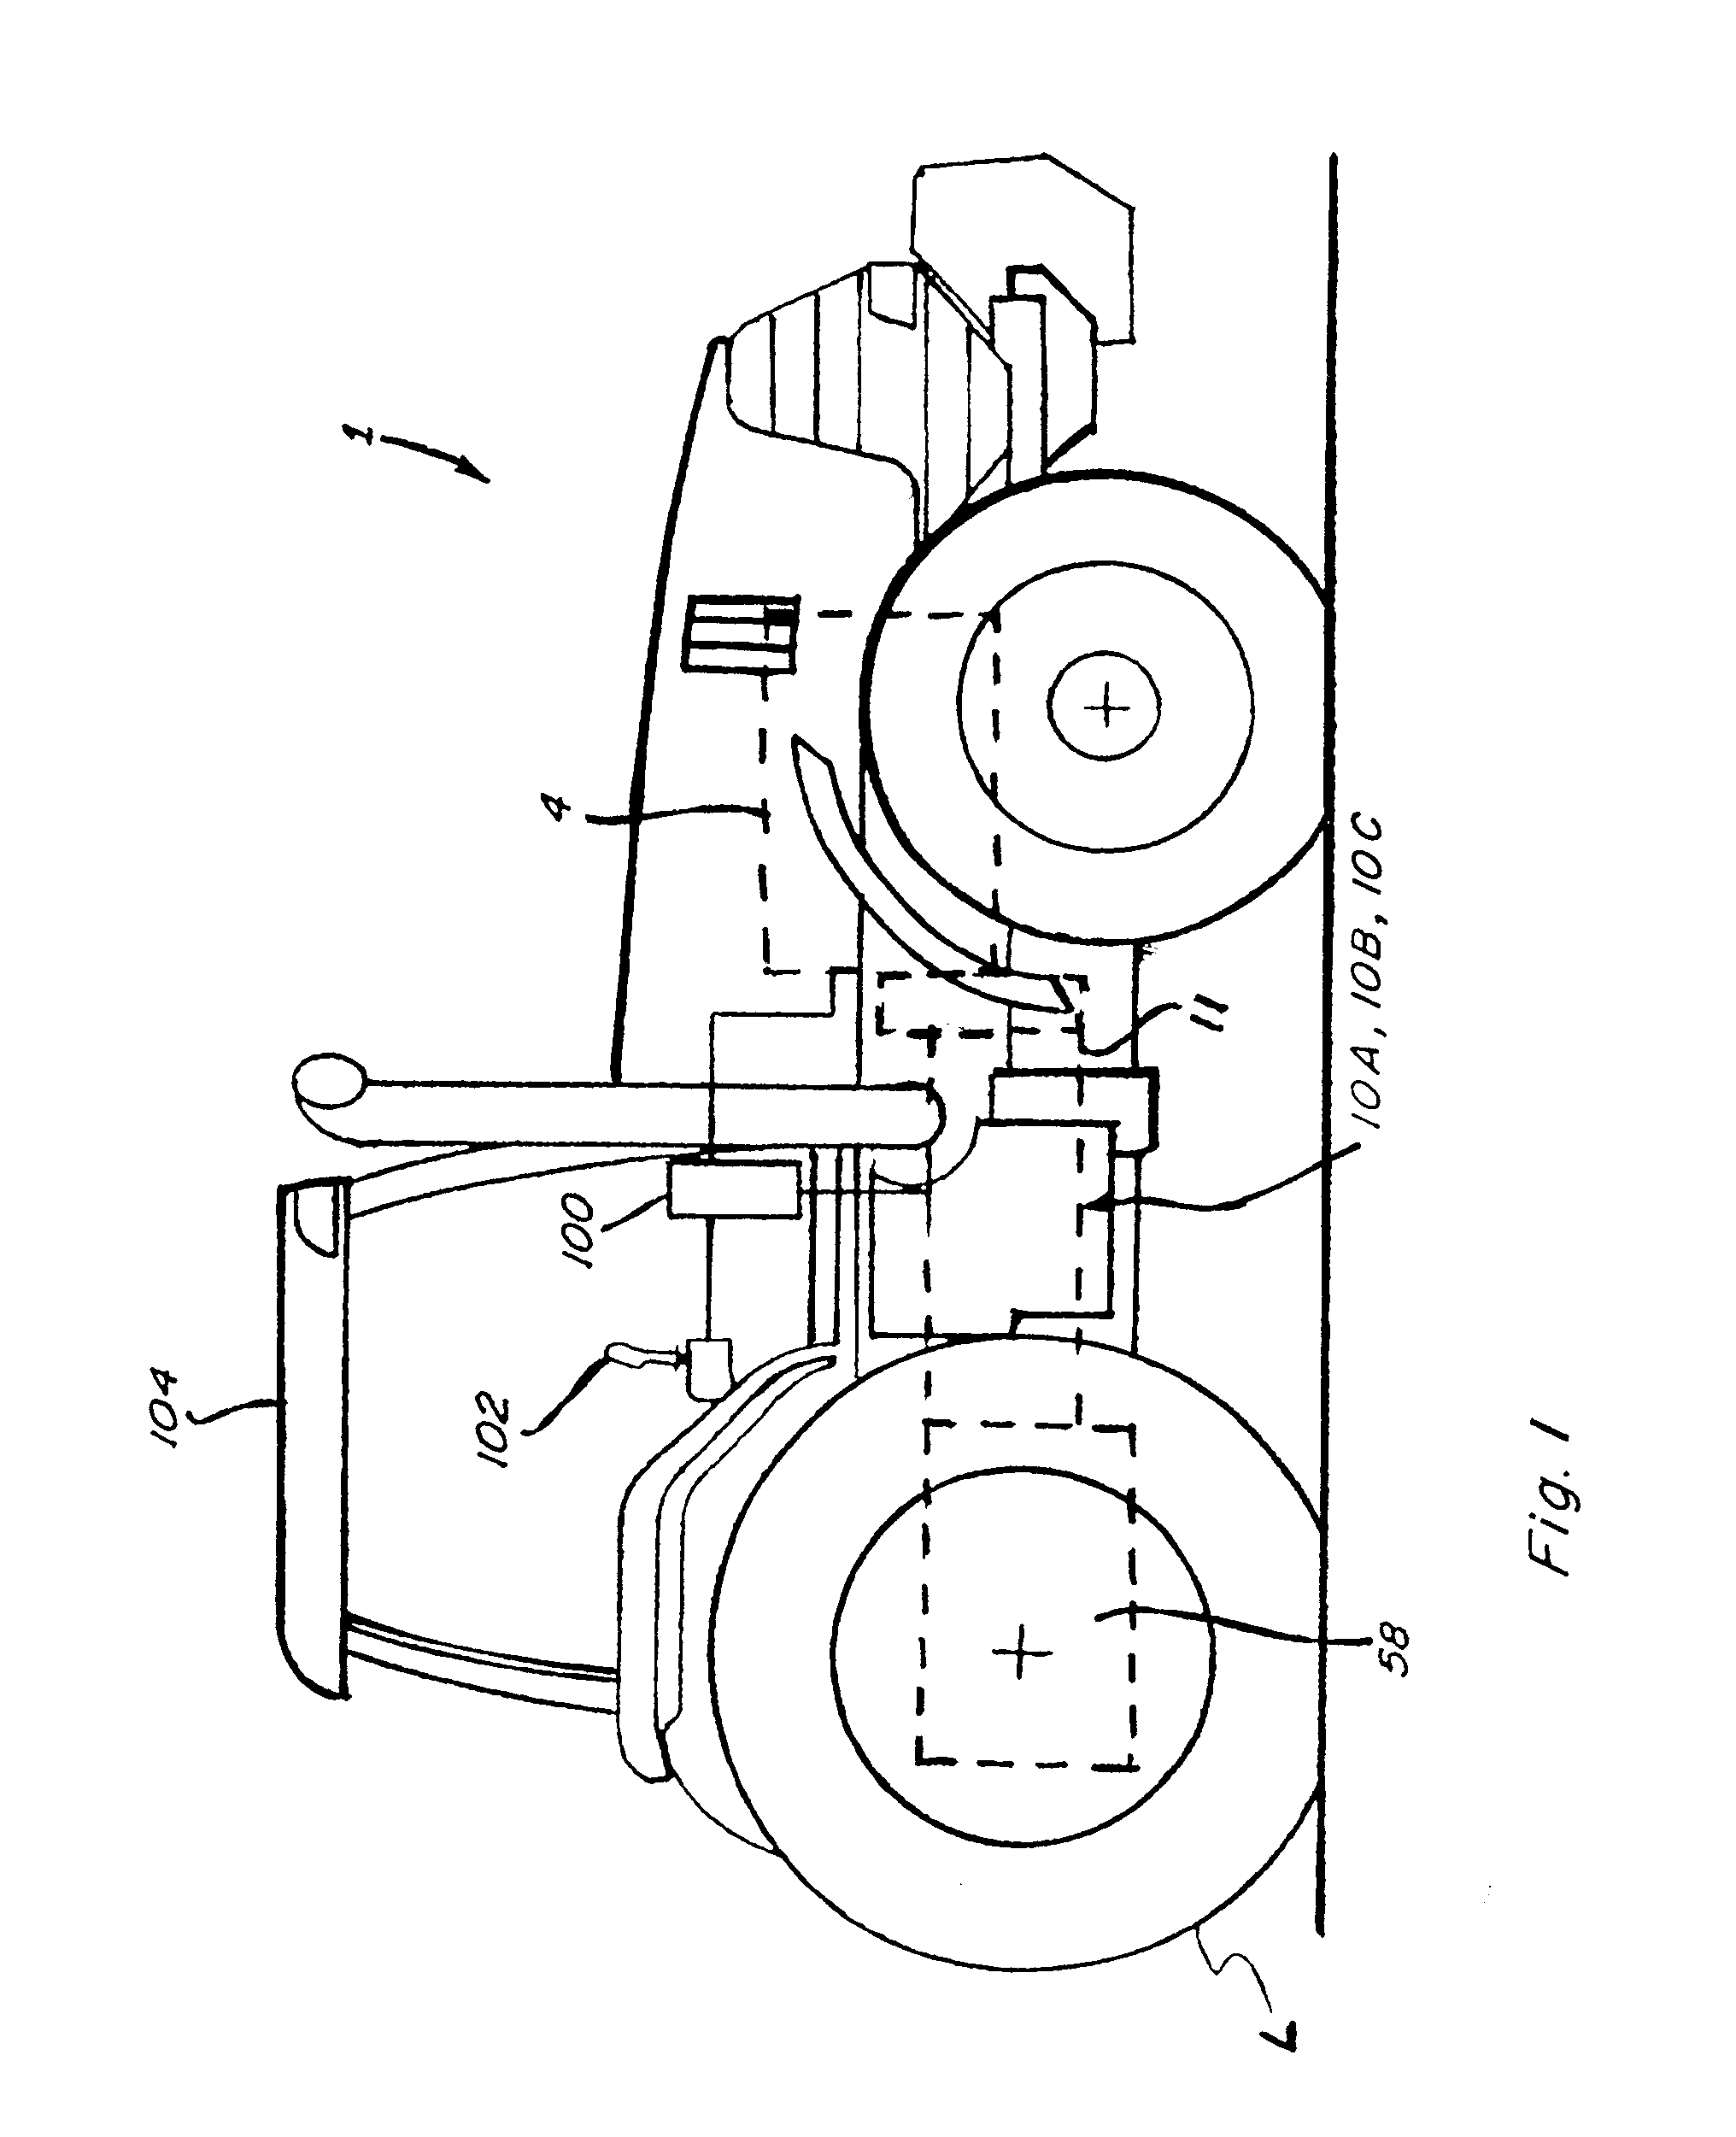 Proportional Parking Brake Control In Cooperation With Operation Of A Conntinuously Variable Transmission